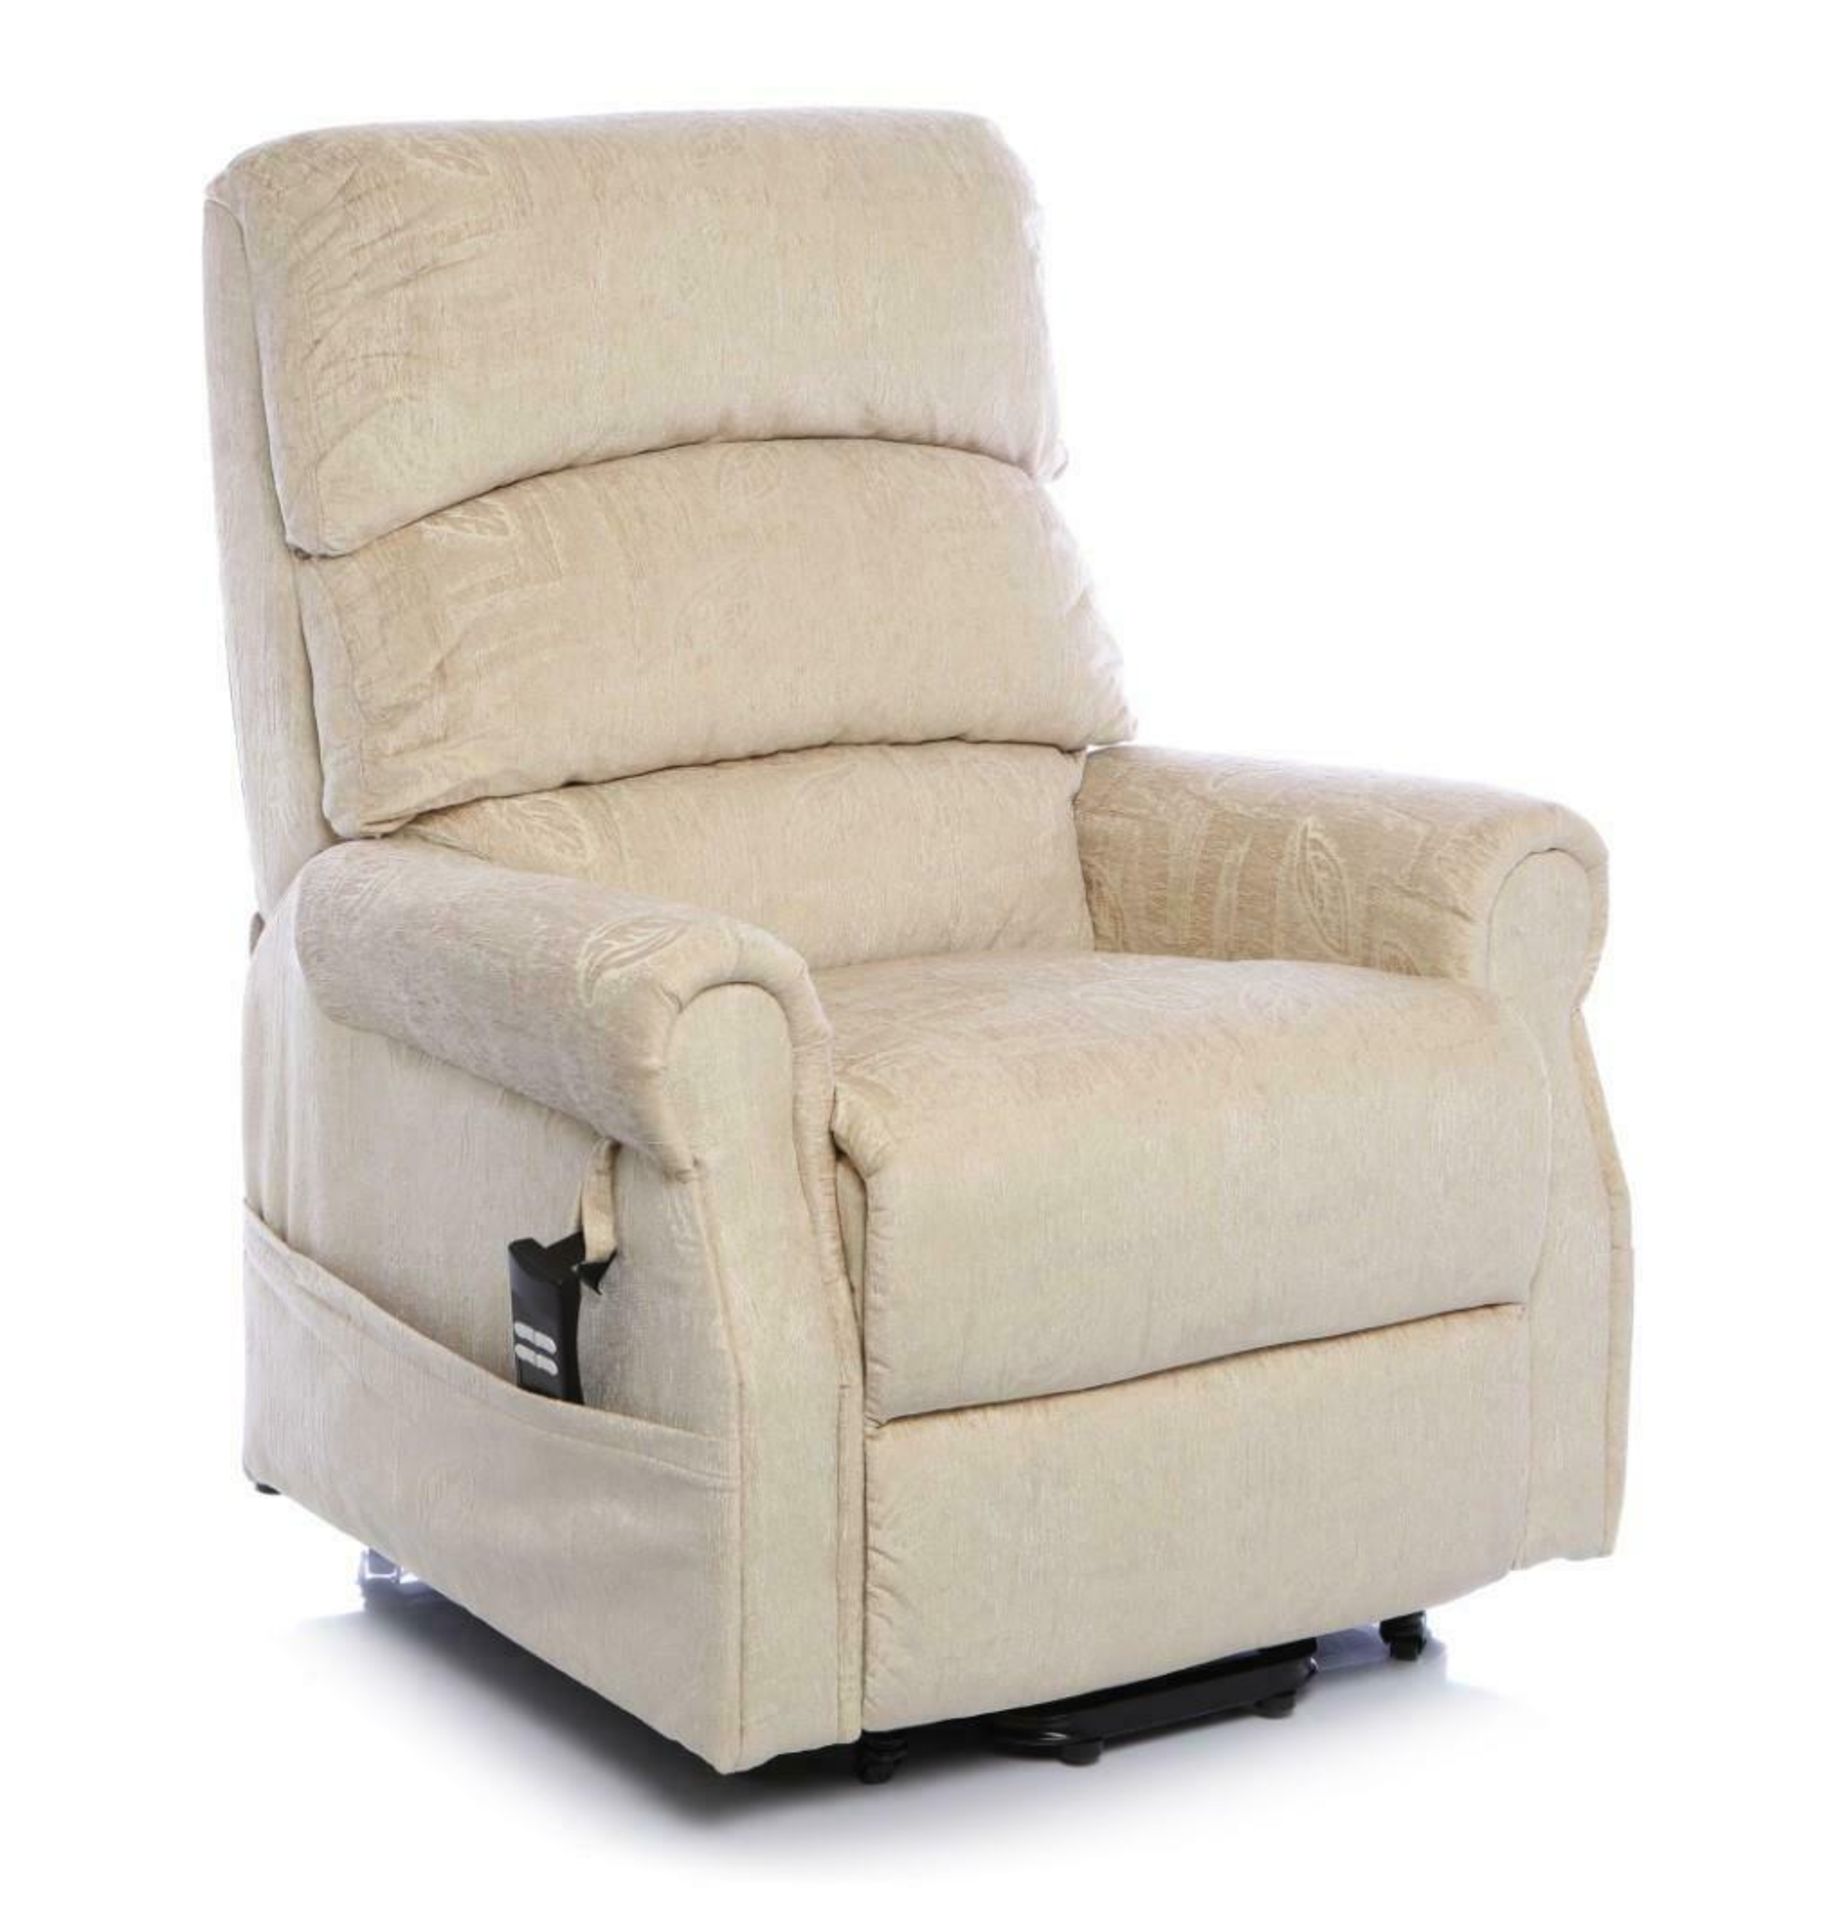 Brand new boxed Augusta dual motor rise/recline electric chair in beige fabric - Image 2 of 2